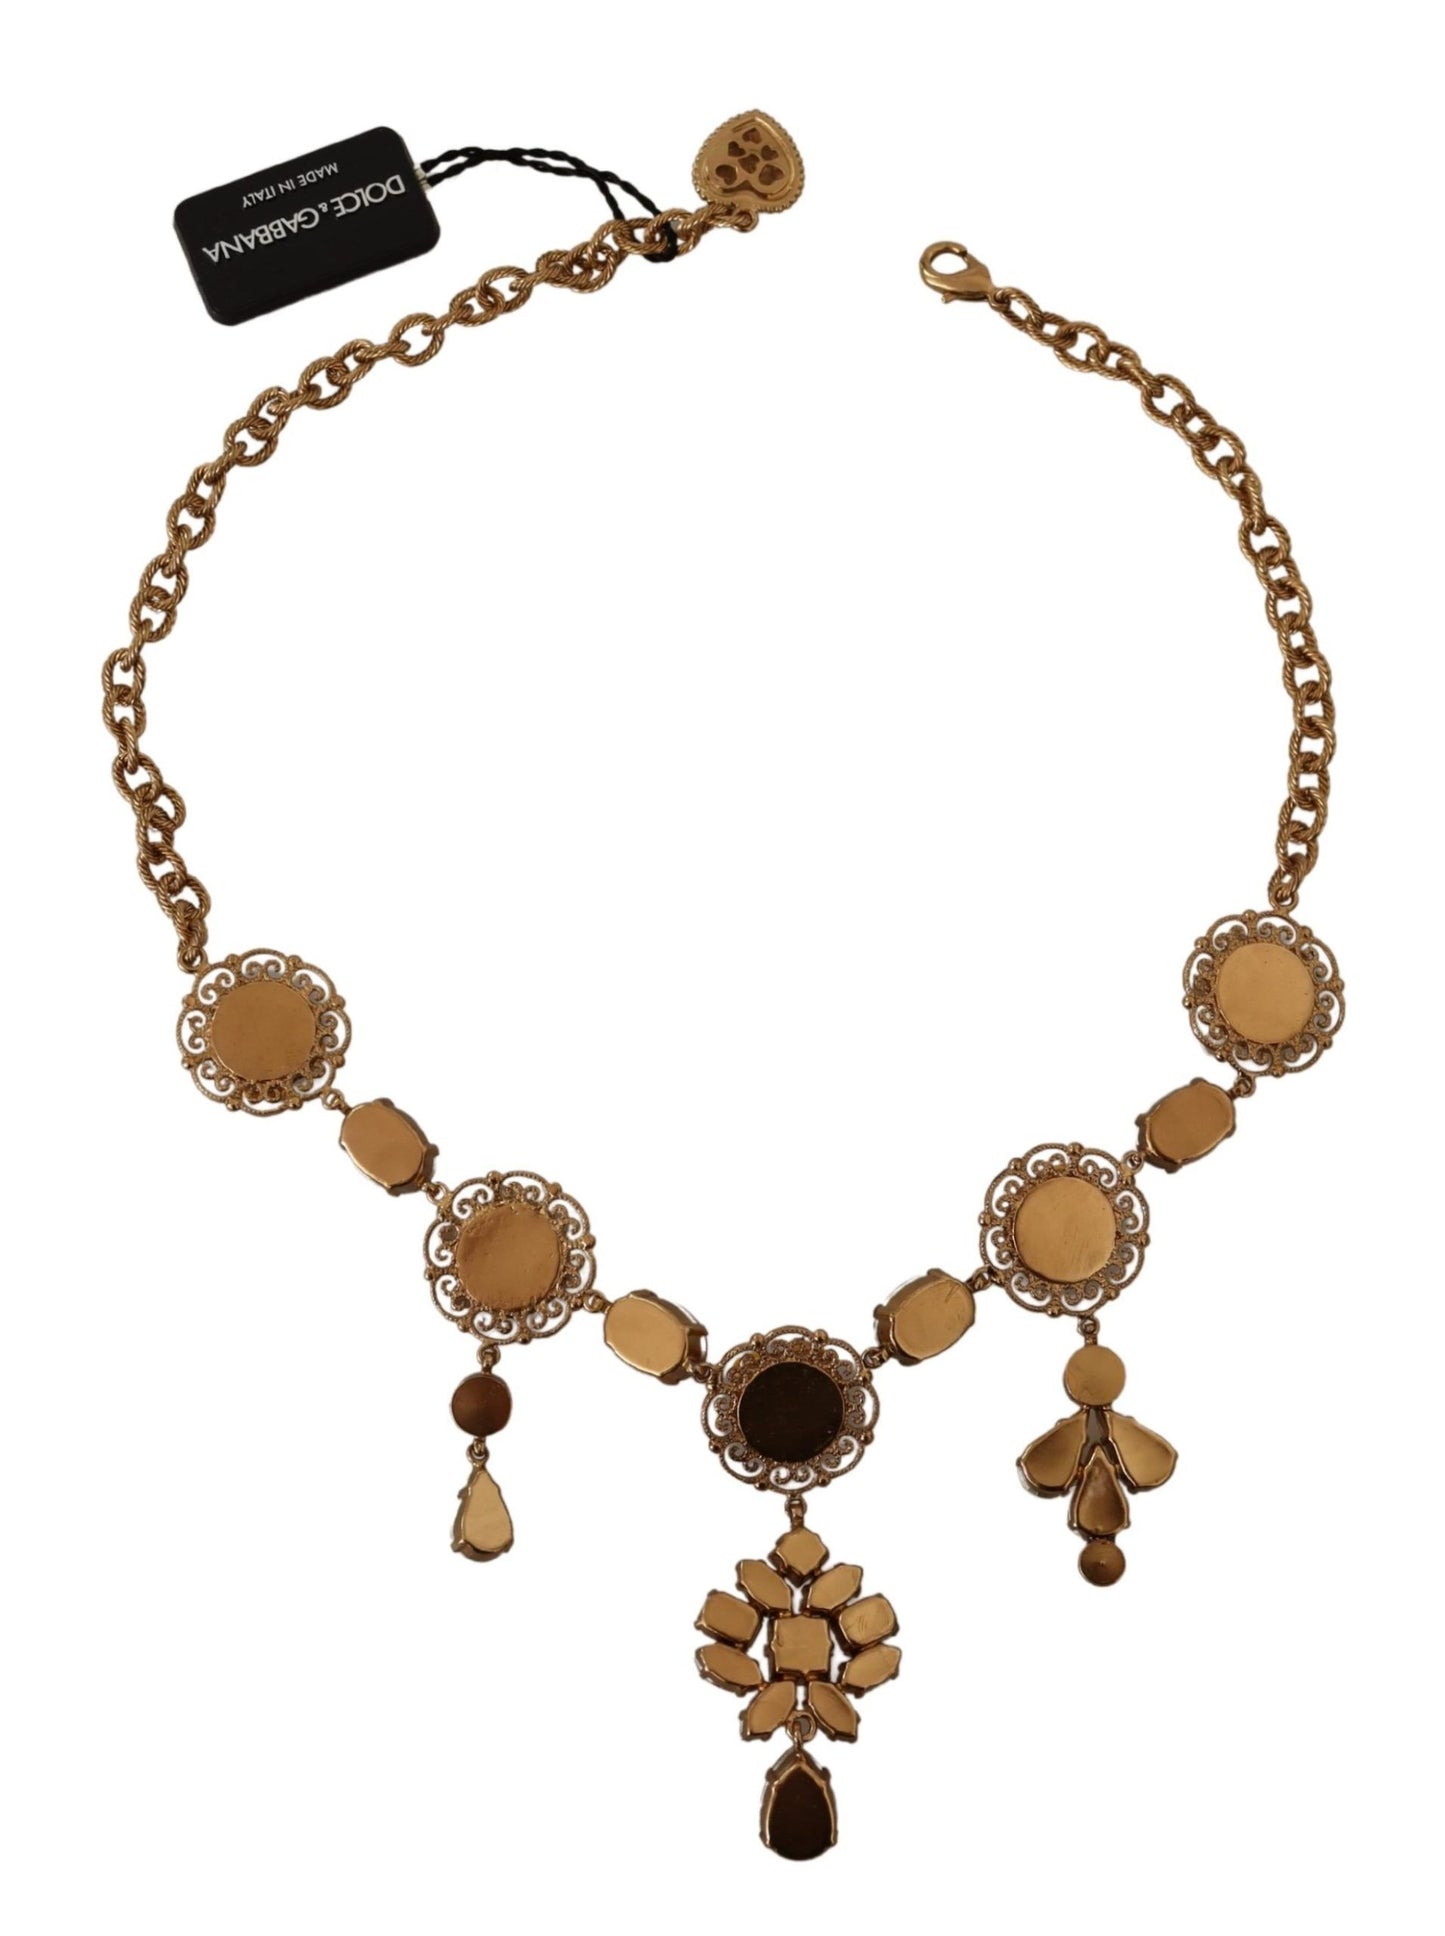 Dolce & Gabbana Gold Messing Floral Sizilien Charms Statement Halskette